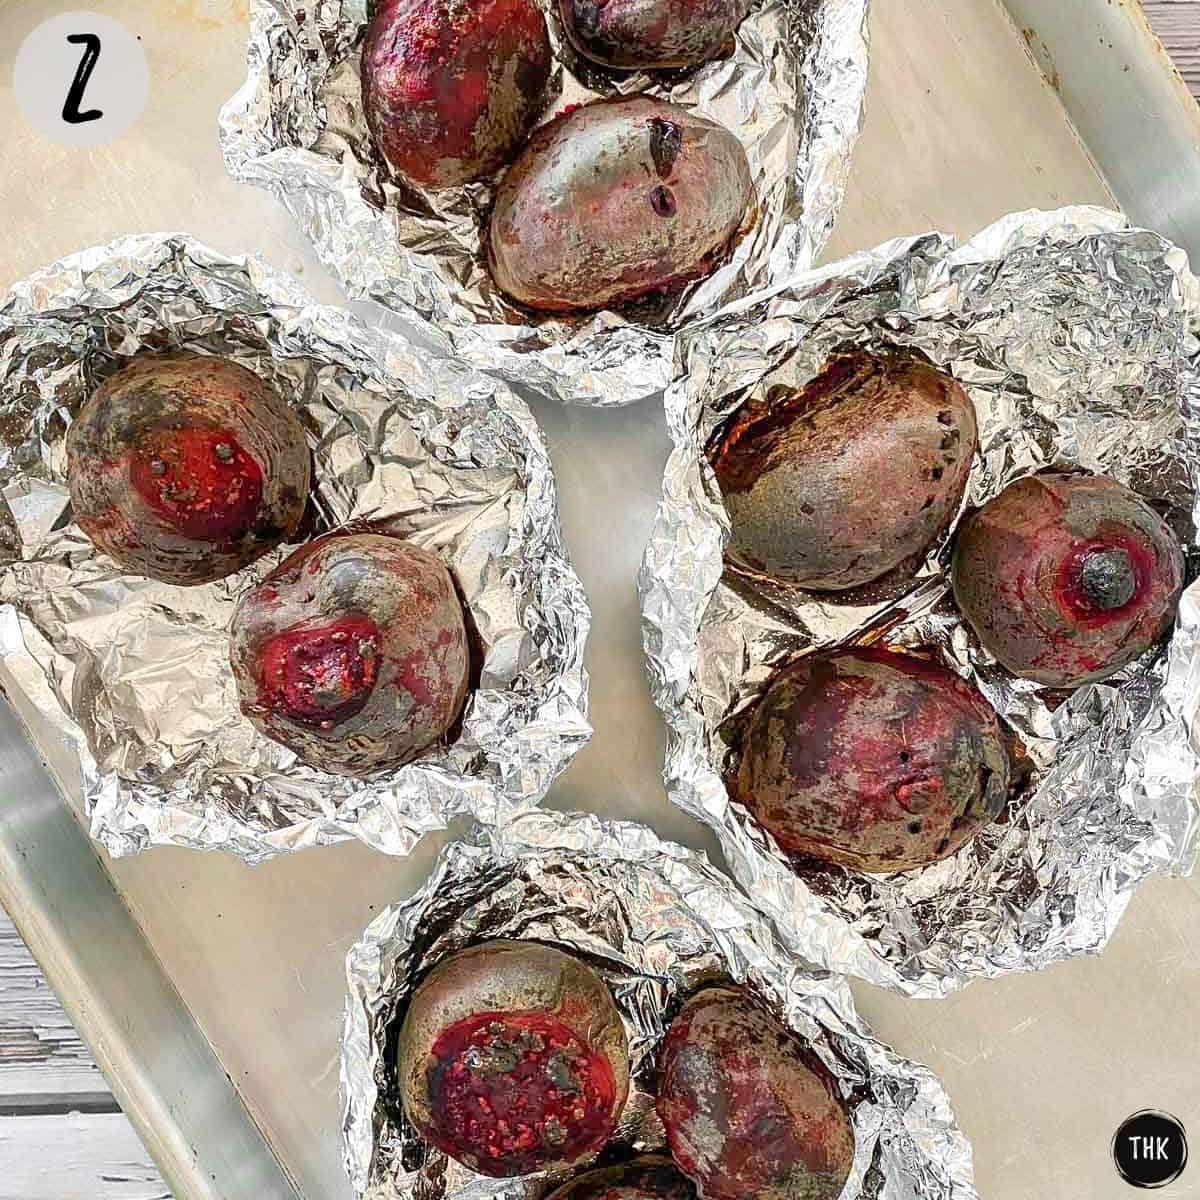 Roasted beets in foil packets on baking sheet.